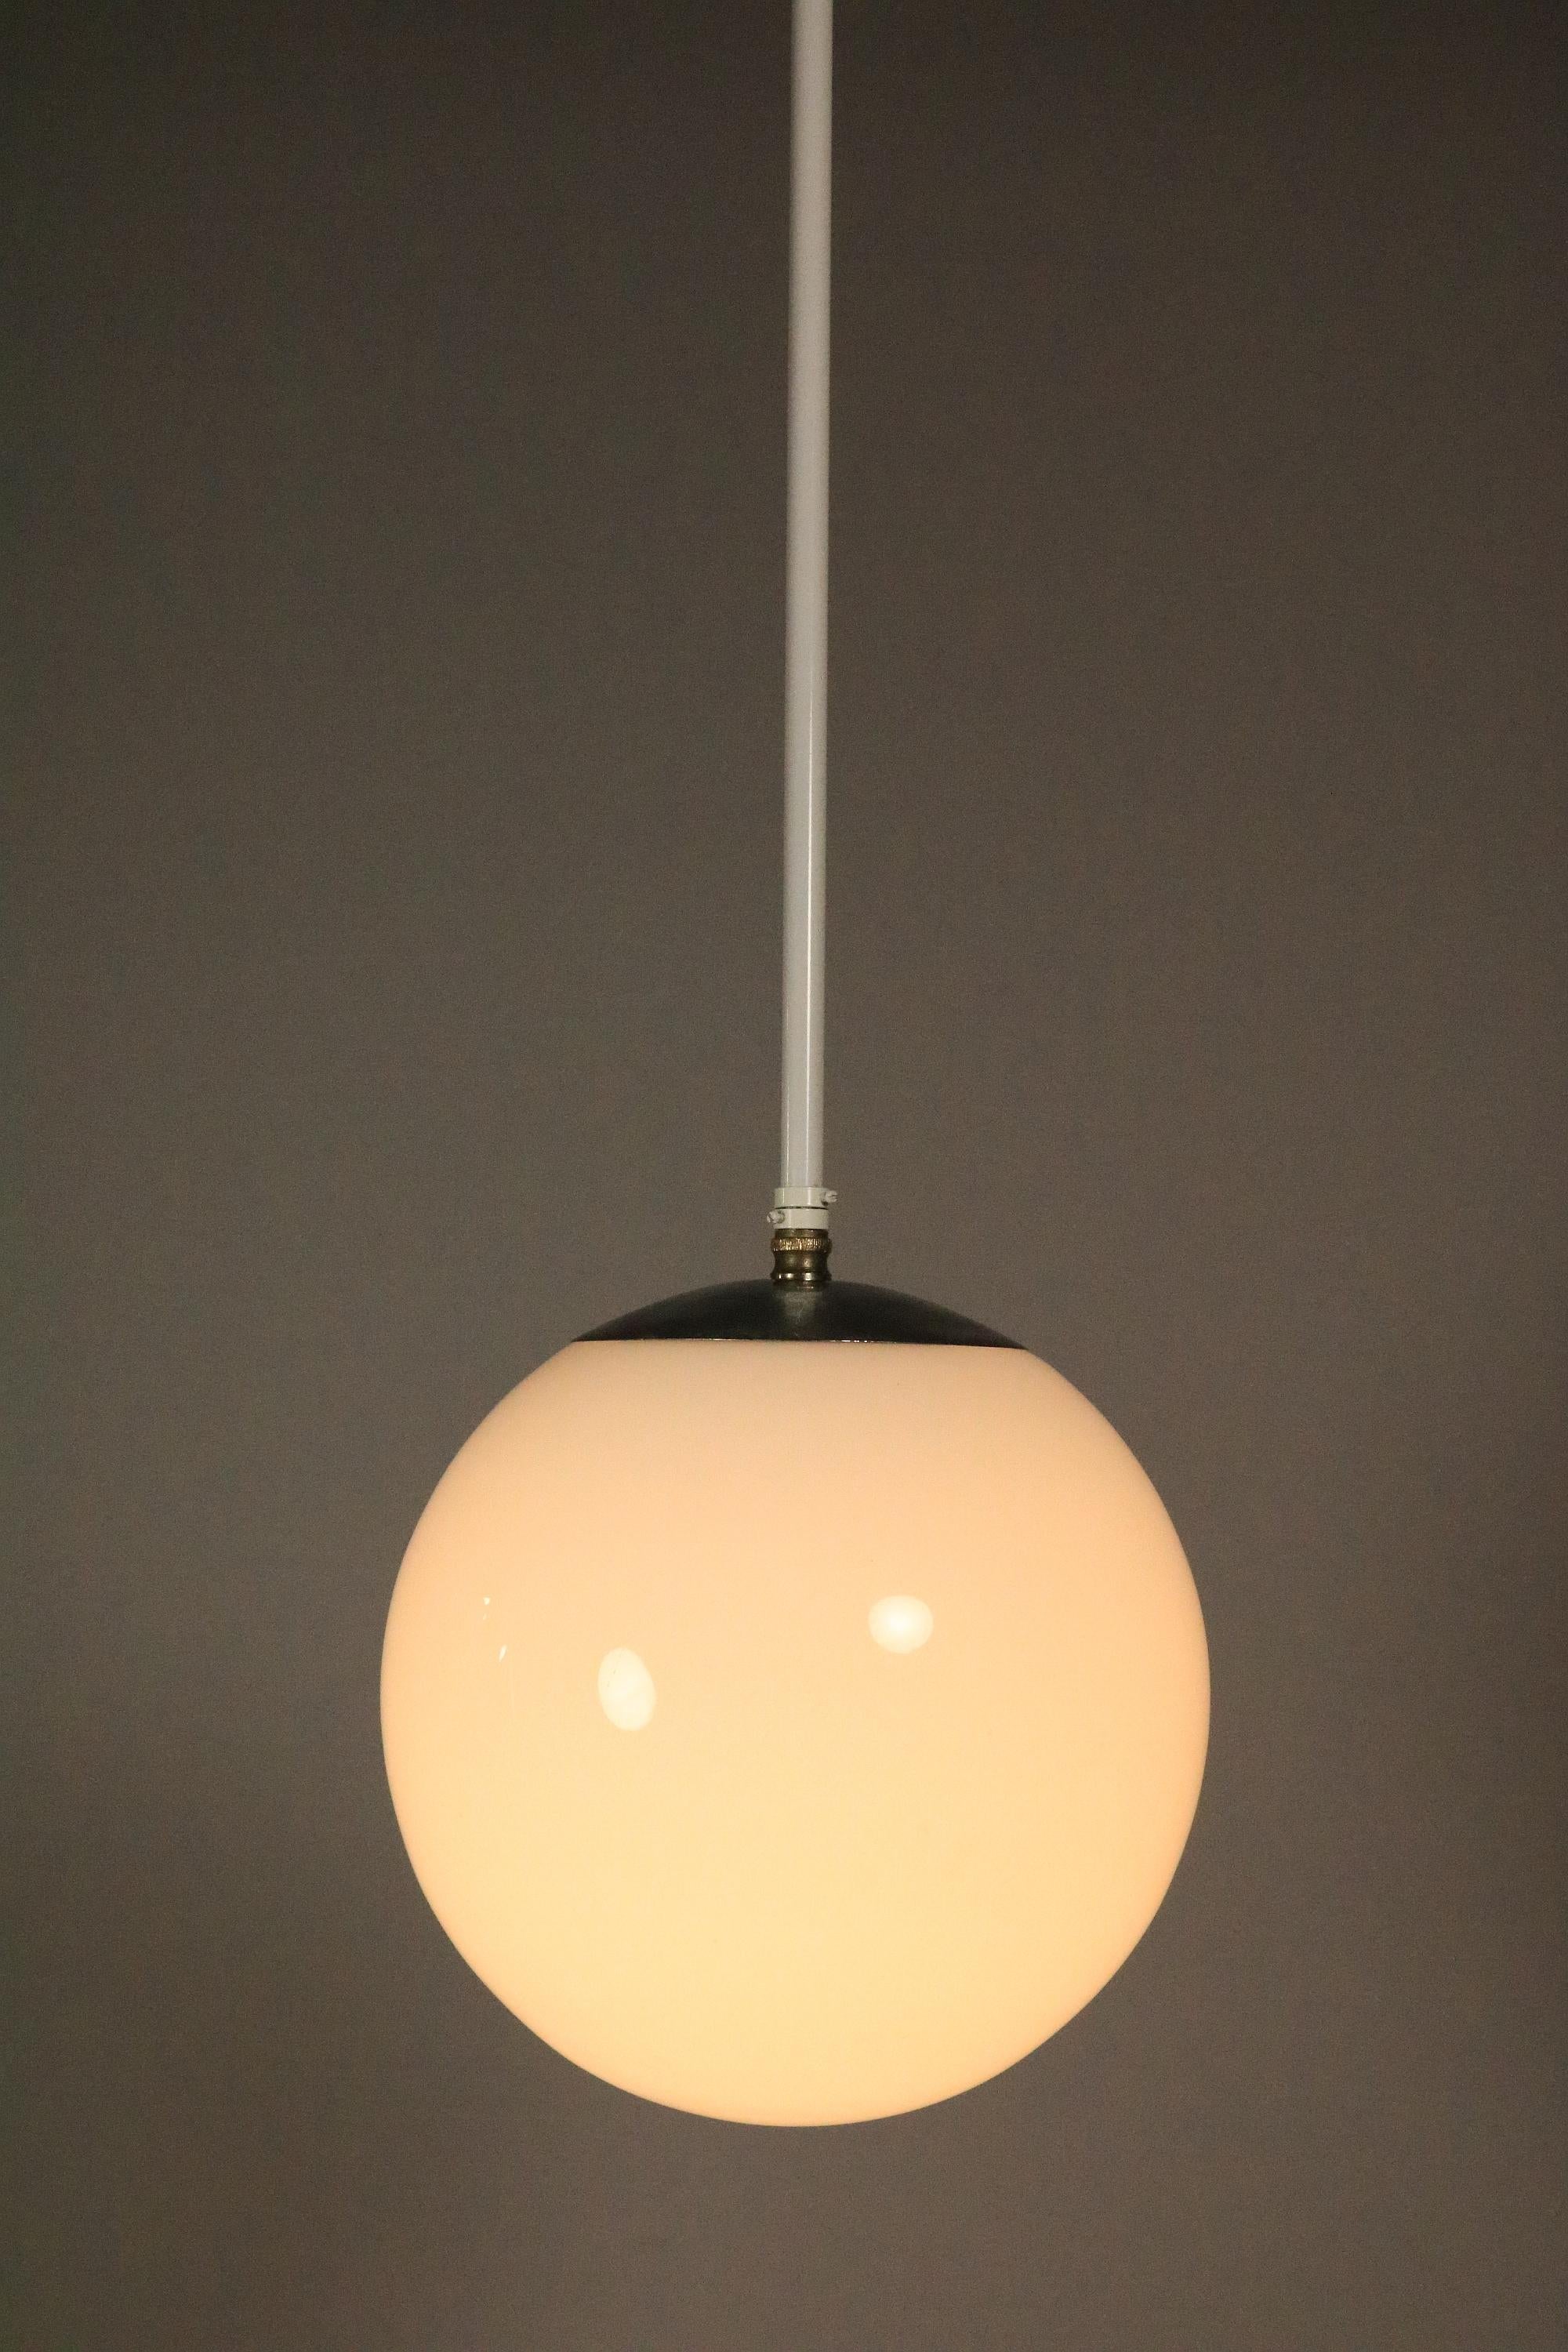 Rare Original 1940s Ball Lamp, Opaline Glass, Denmark, Bauhaus Style In Good Condition For Sale In Berlin, BE